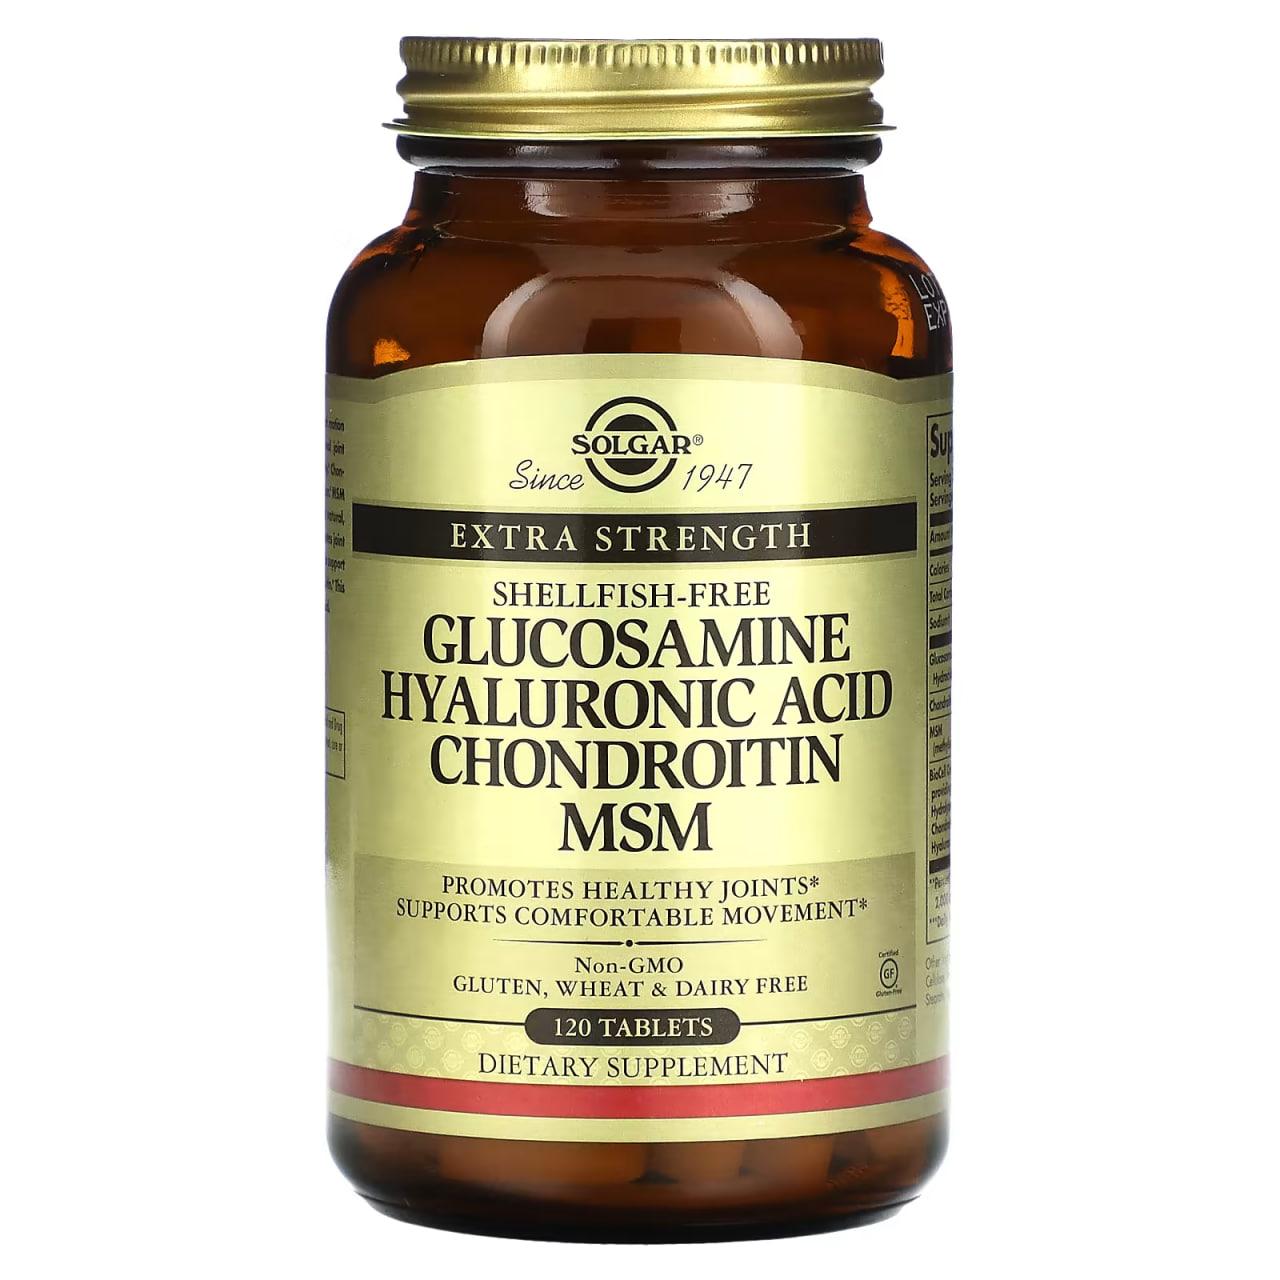 Solgar Glucosamine Hyaluronic Acid Chondroitin MSM 120 tabs,  ml, Solgar. For joints and ligaments. General Health Ligament and Joint strengthening 